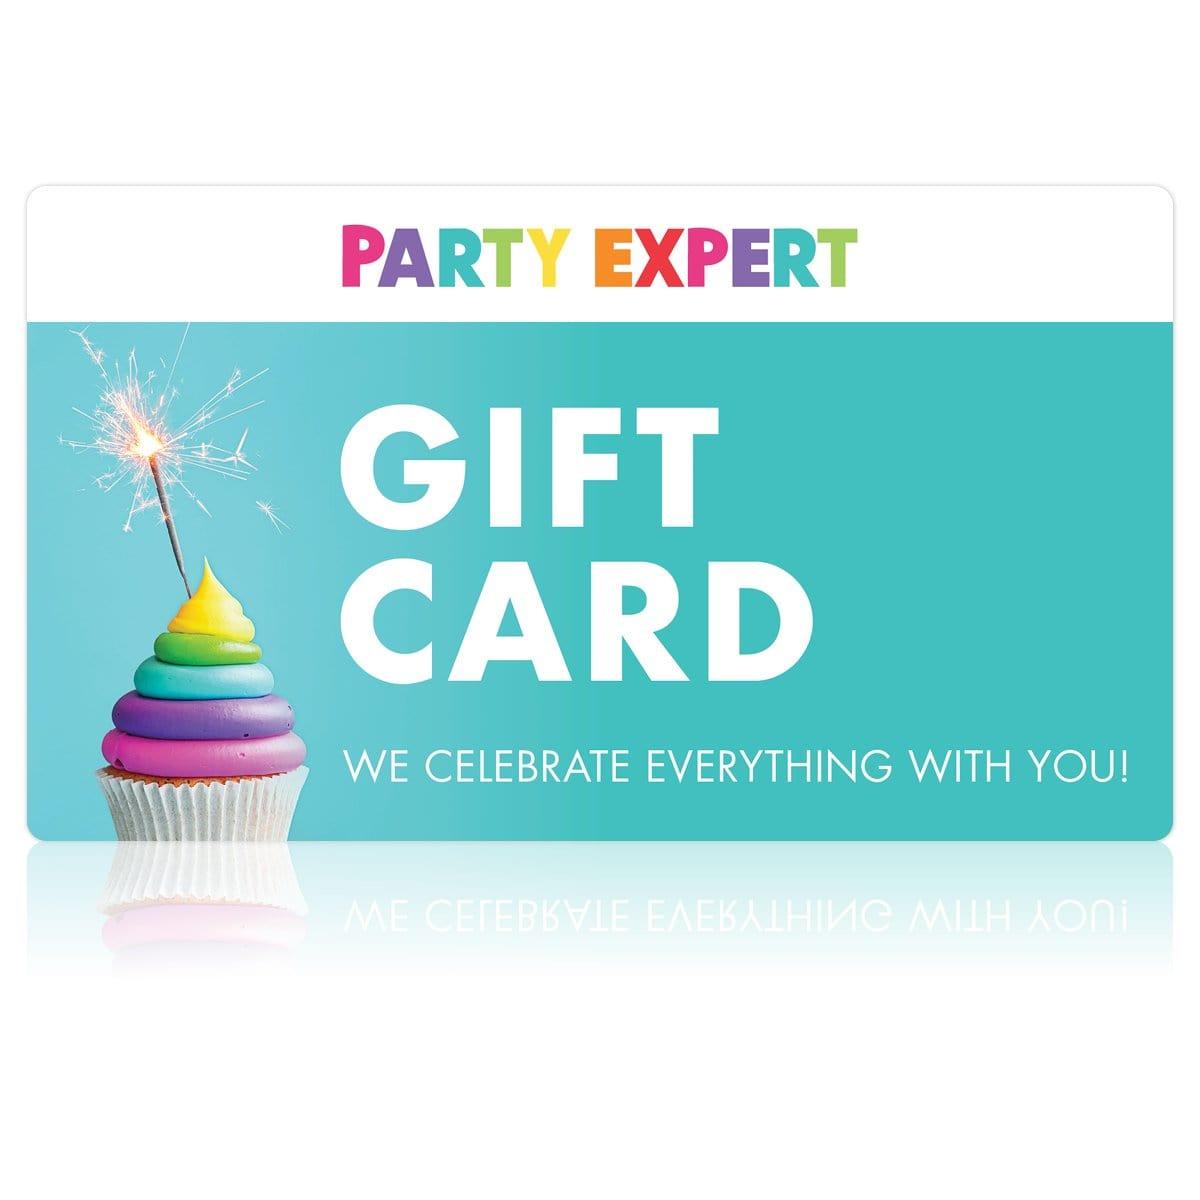 Buy Party Expert eGift Card sold at Party Expert